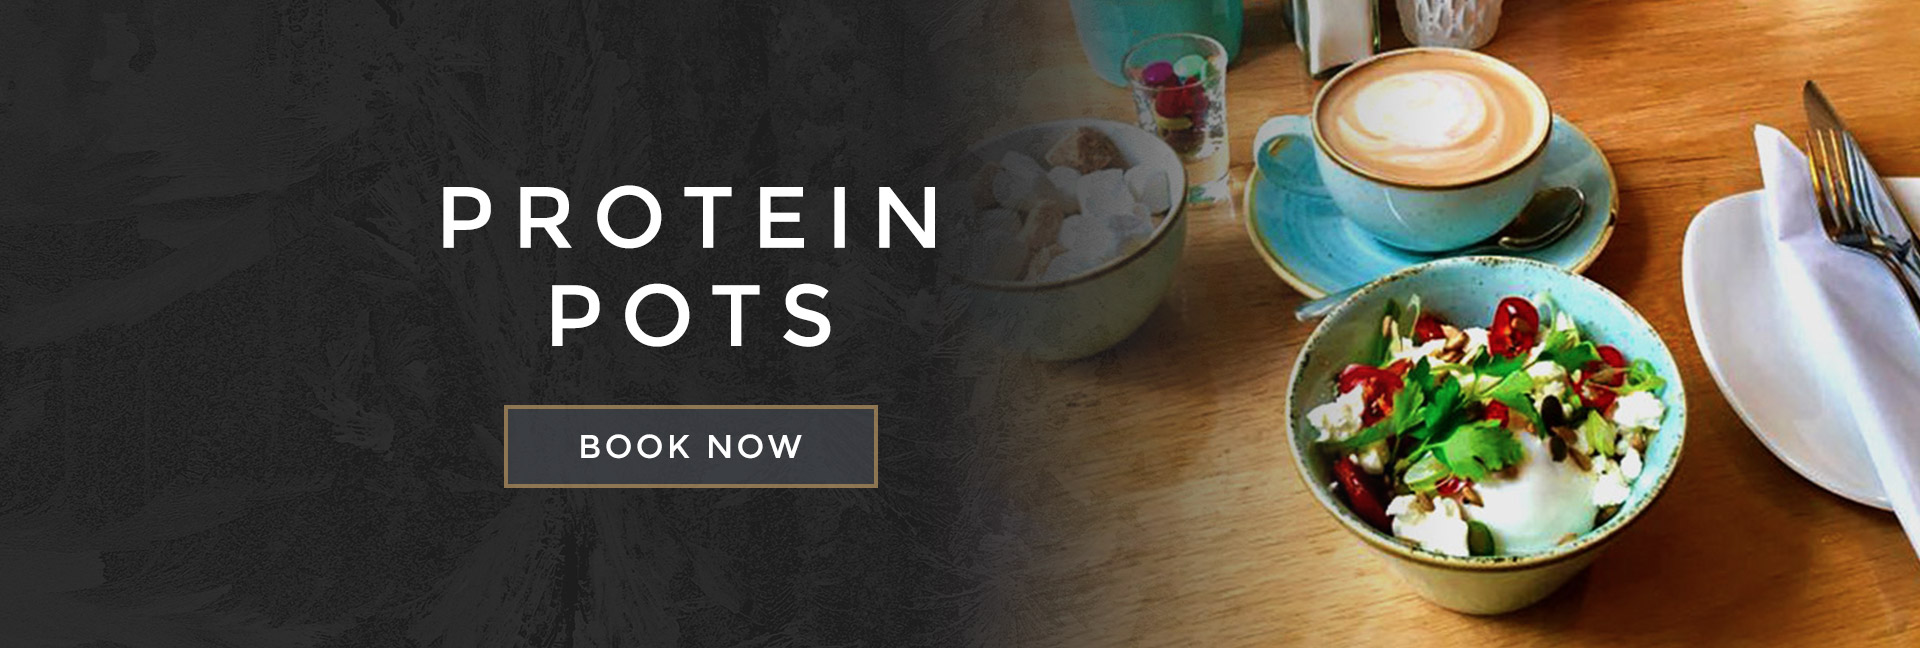 Protein pots at All Bar One Manchester - Book your table